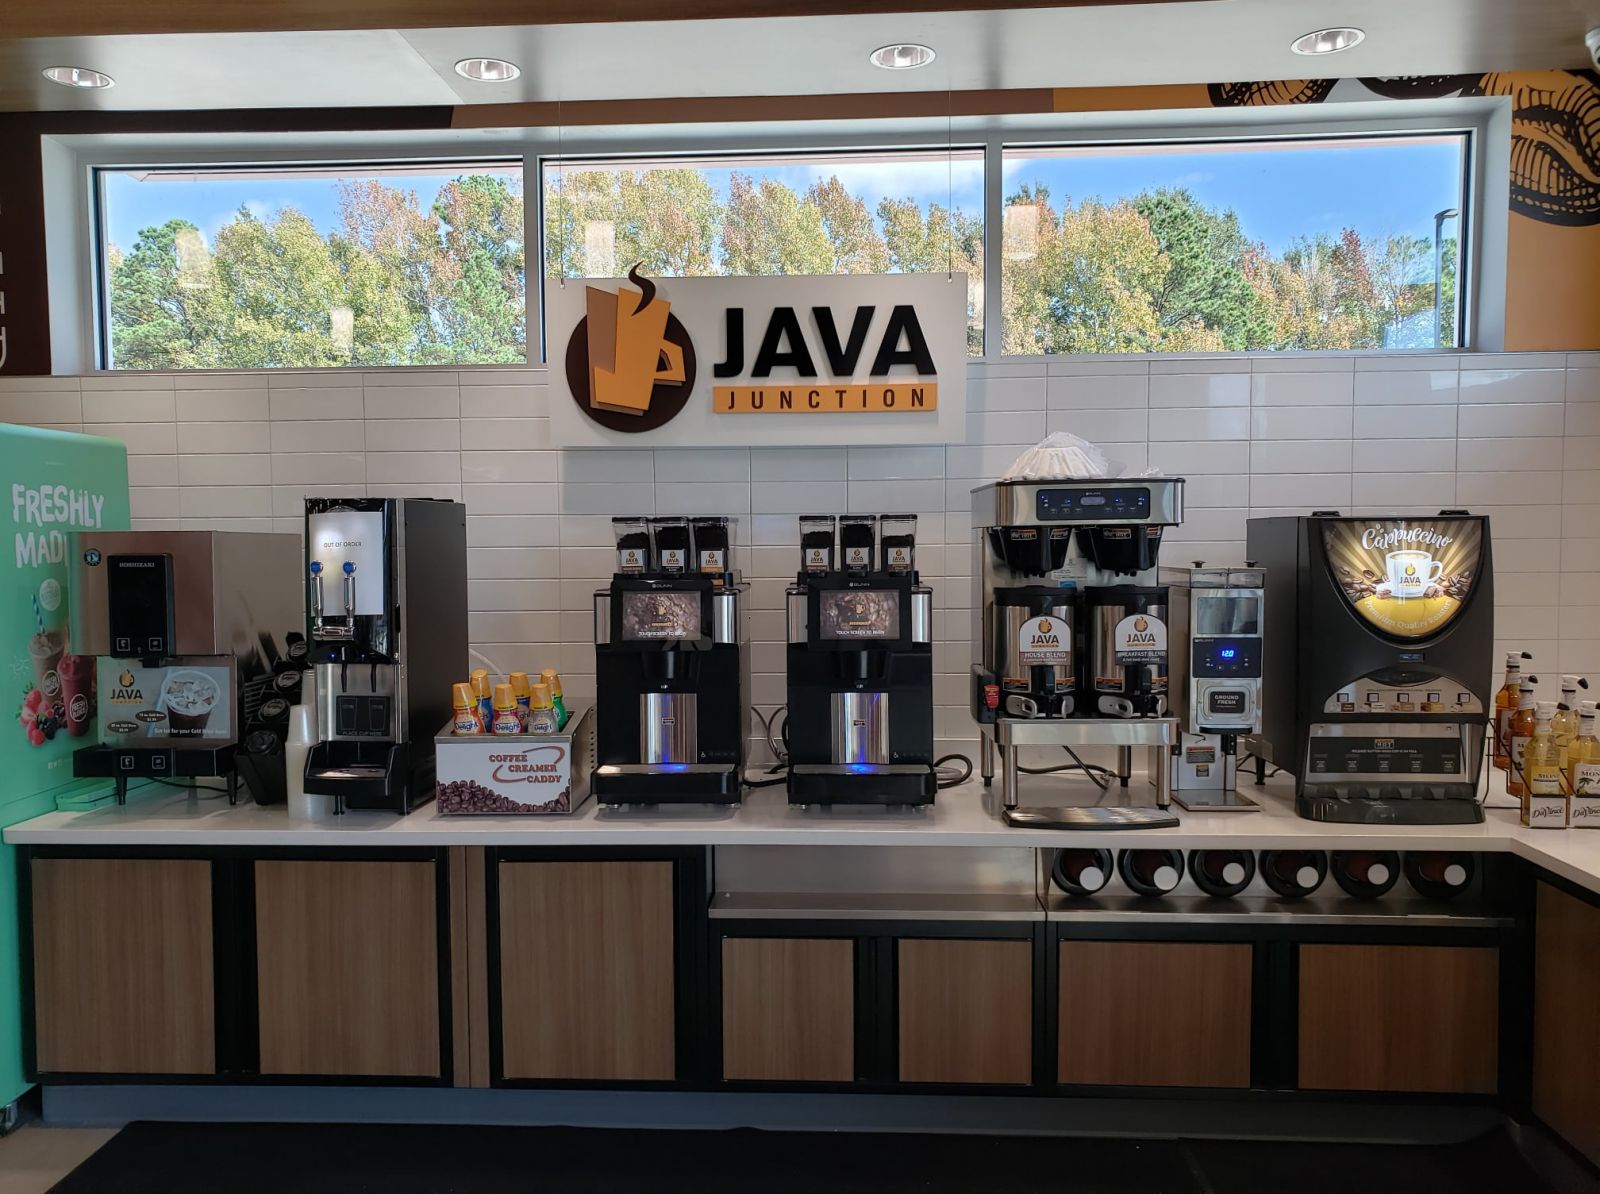 Java Junction, the coffee area from one of our stores